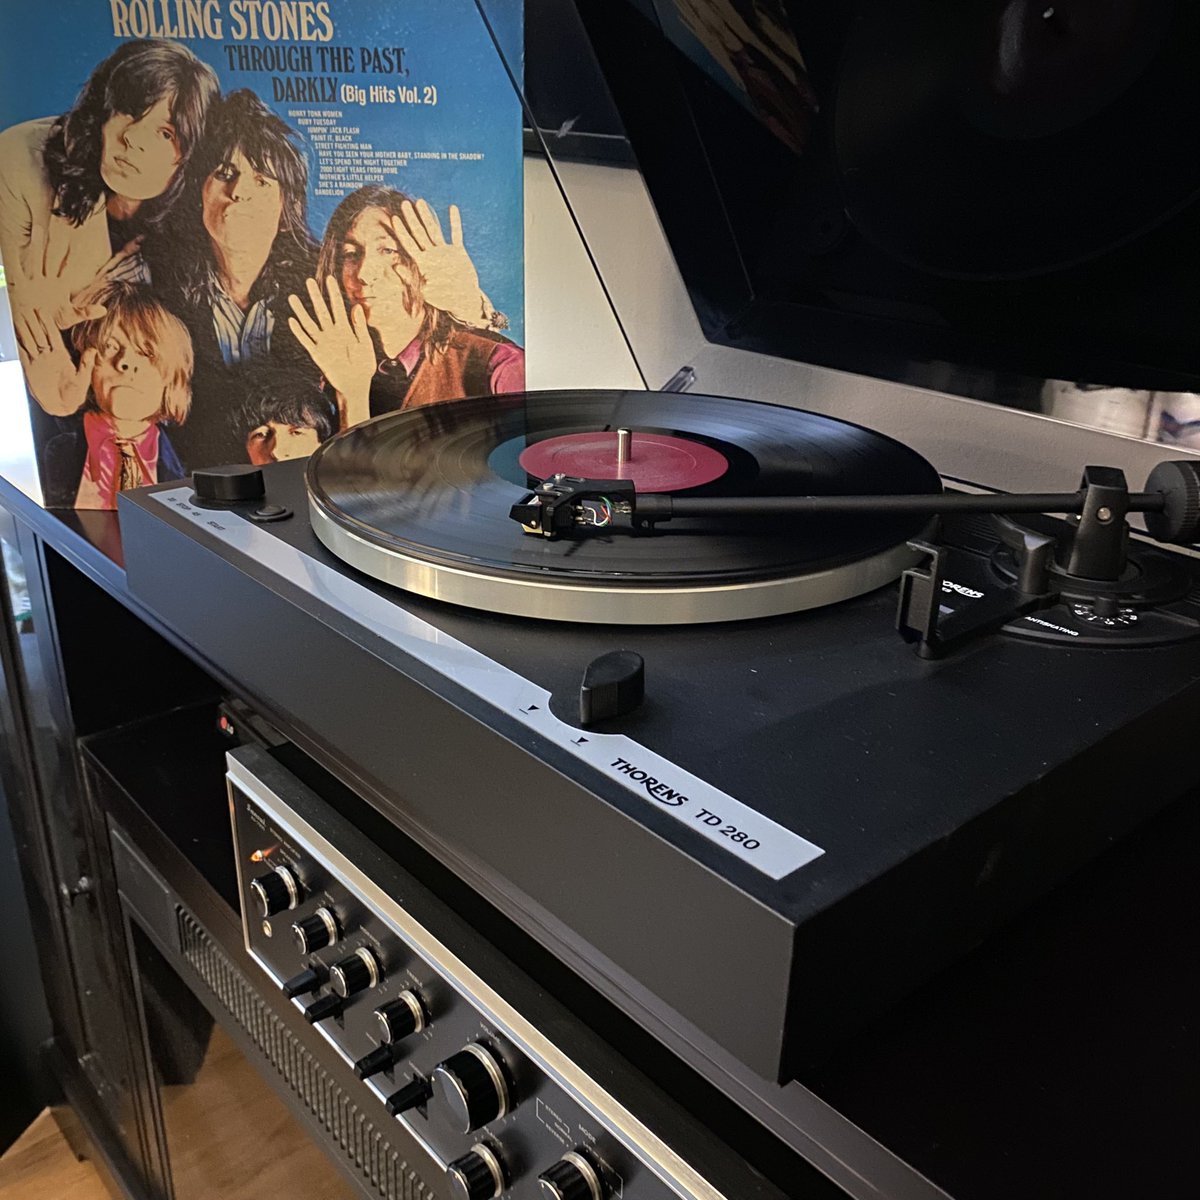 🤩 Playing around with my new set-up, a Thorens TD 280 turntable with a Sansui AU-7500 amp, spinning the Rolling Stones “Through The Past, Darkly (Big Hits Vol. 2)” from 1969 on London Records. 
#albumart #fleecerecords #thorensturntable #sansuivintage #audiophile #rollingstones